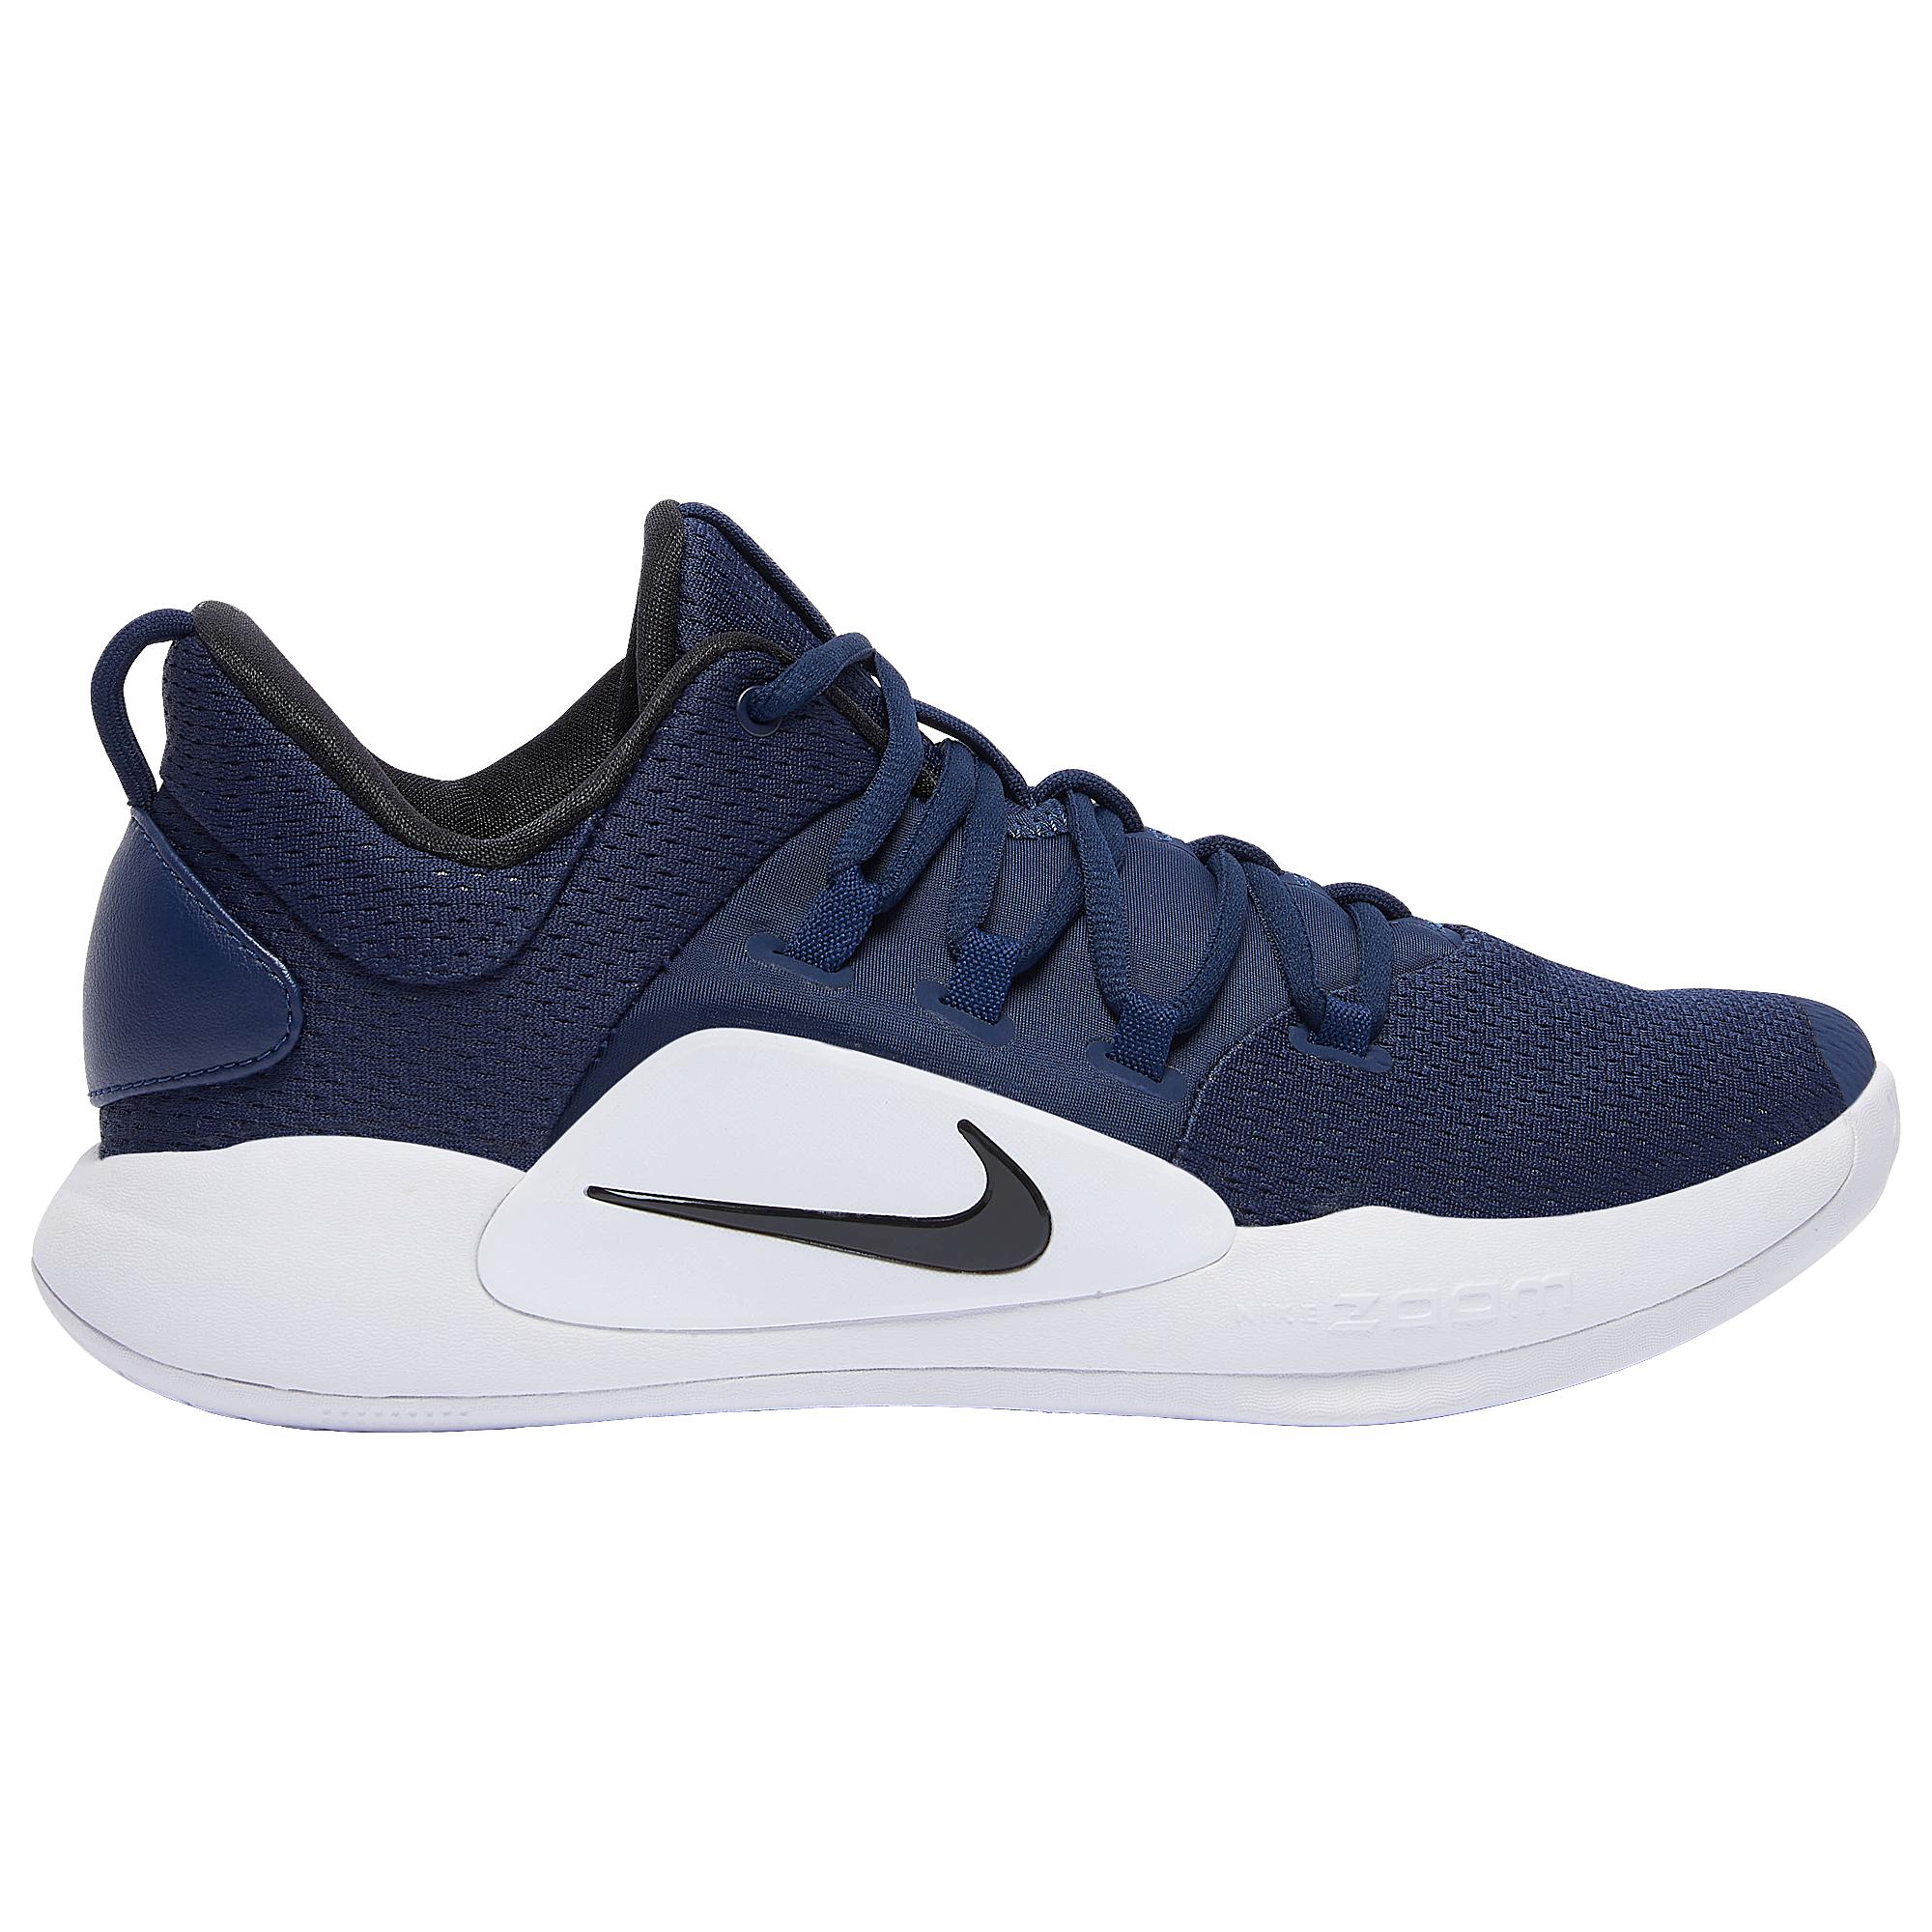 Nike Hyperdunk X Low Basketball Shoes in Navy/White (Blue) for Men - Lyst